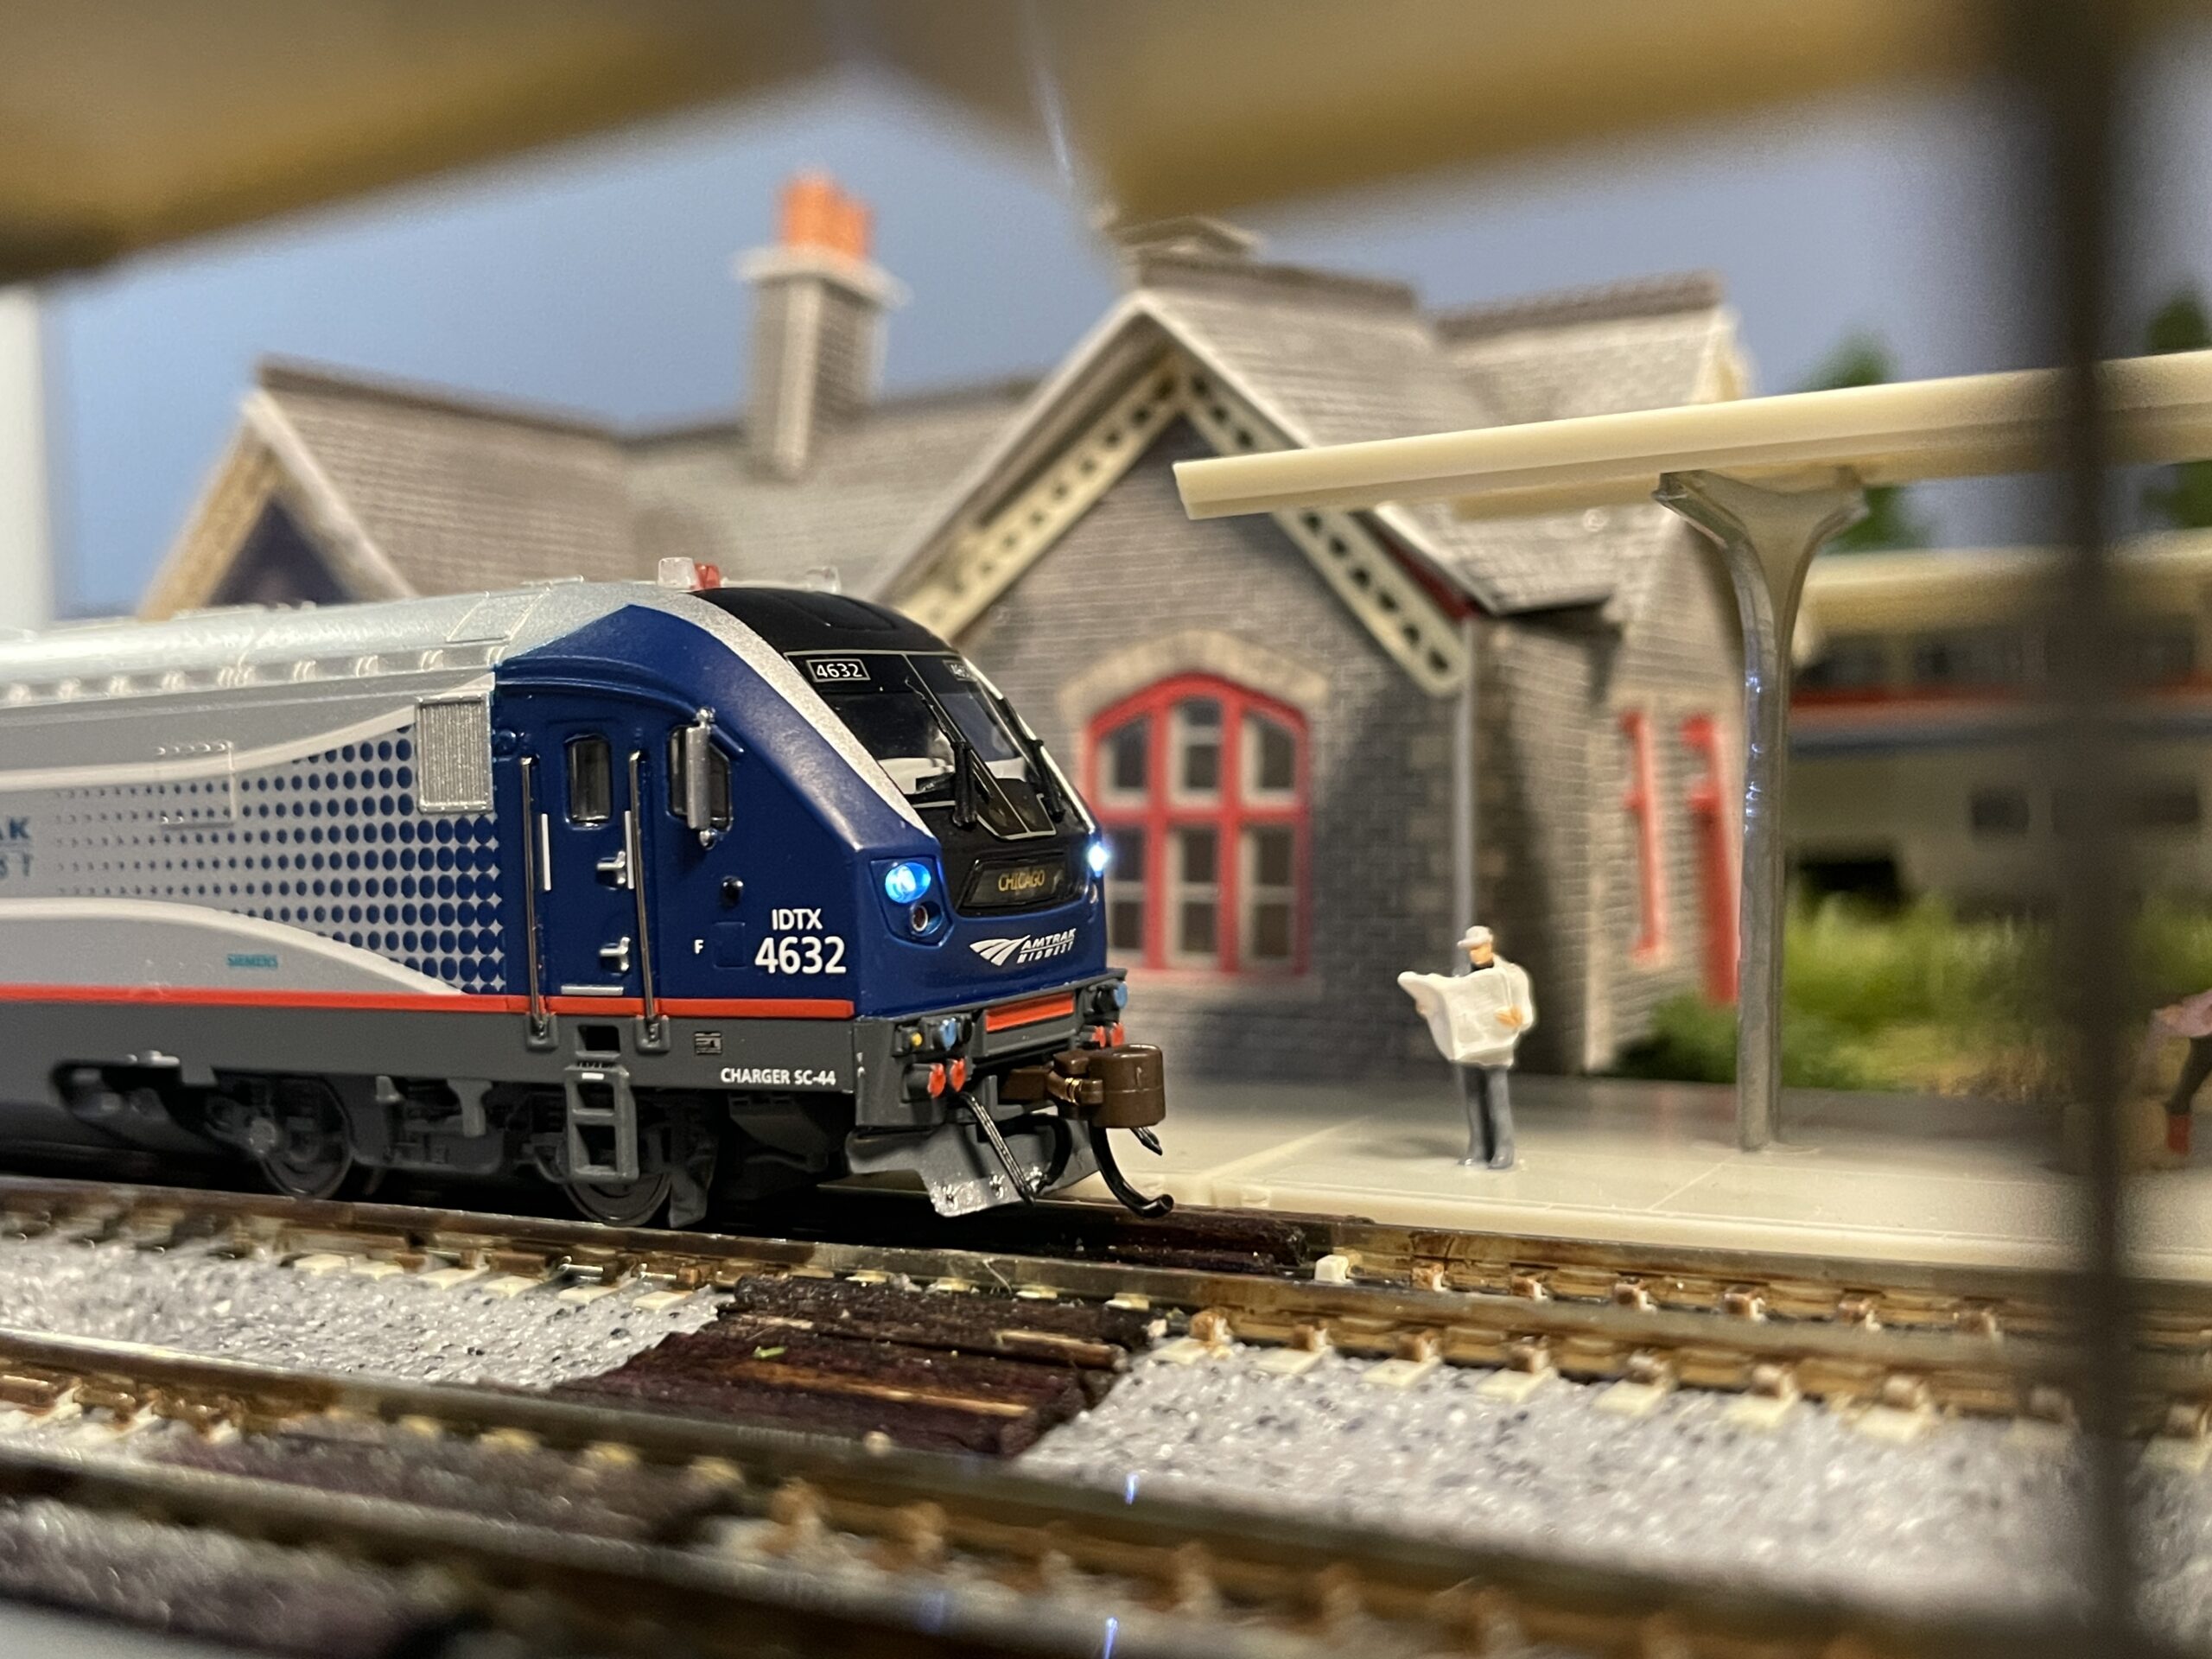 New on the Layout – Bachmann SC-44 Charger